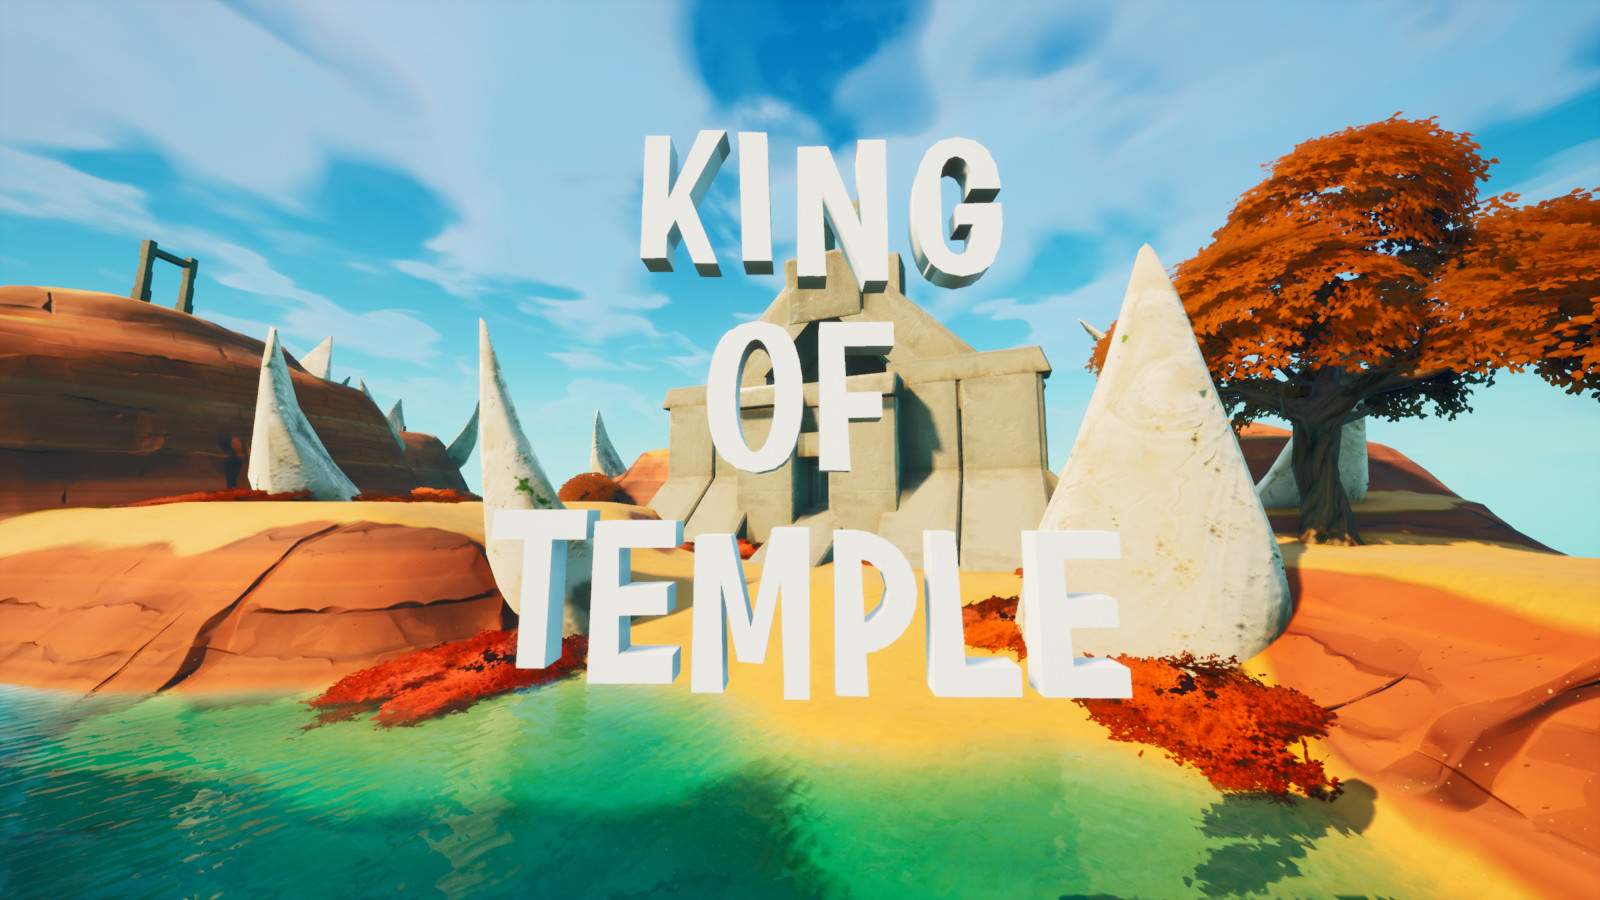 KING OF TEMPLE